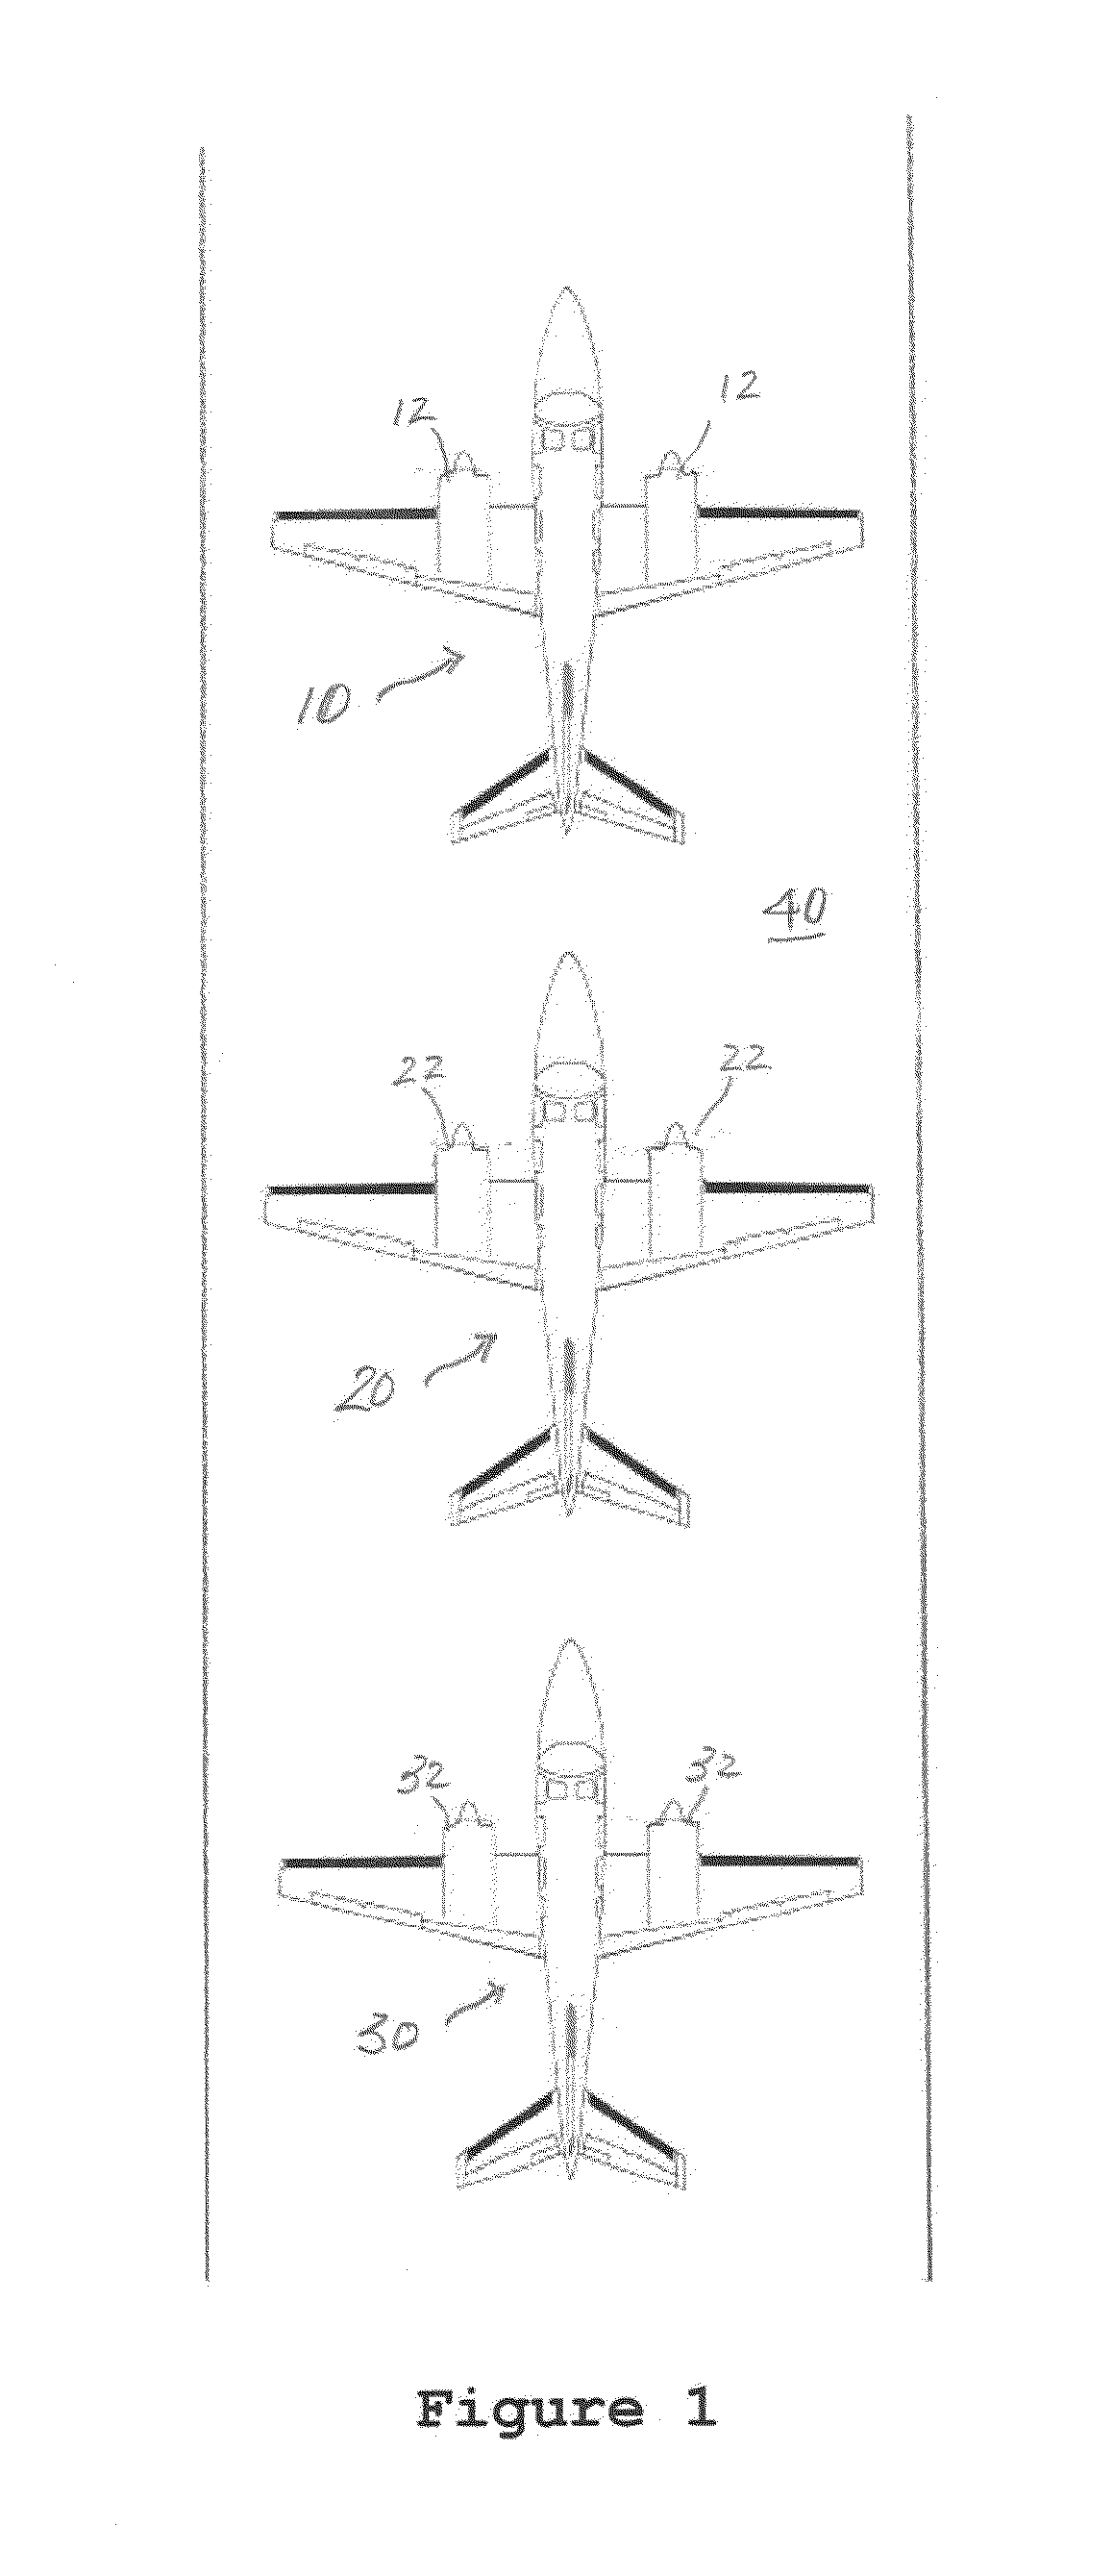 Method for improving efficiency of airport deicing operations